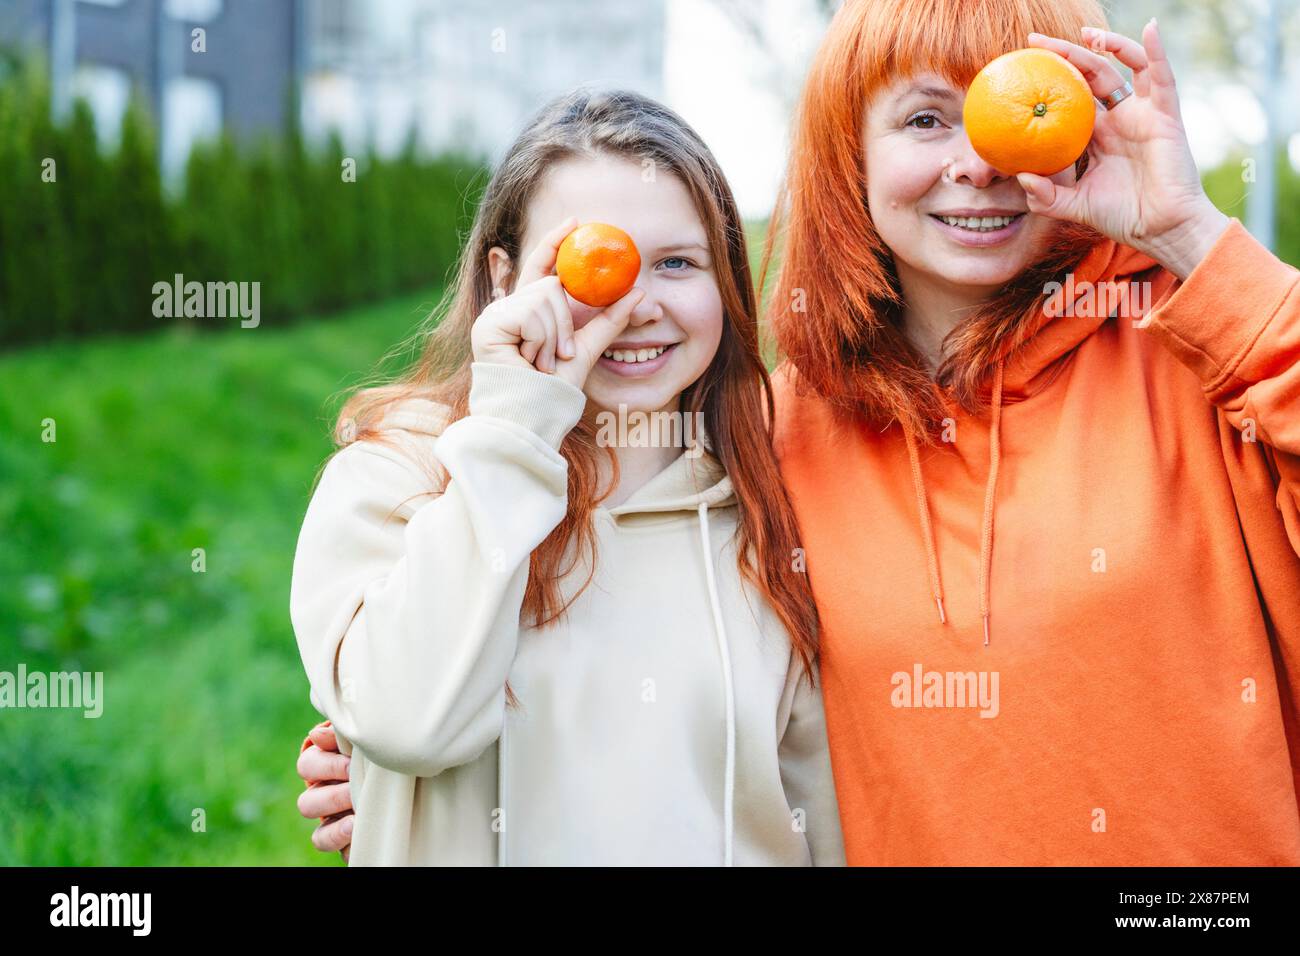 Happy mother and daughter holding oranges over face Stock Photo